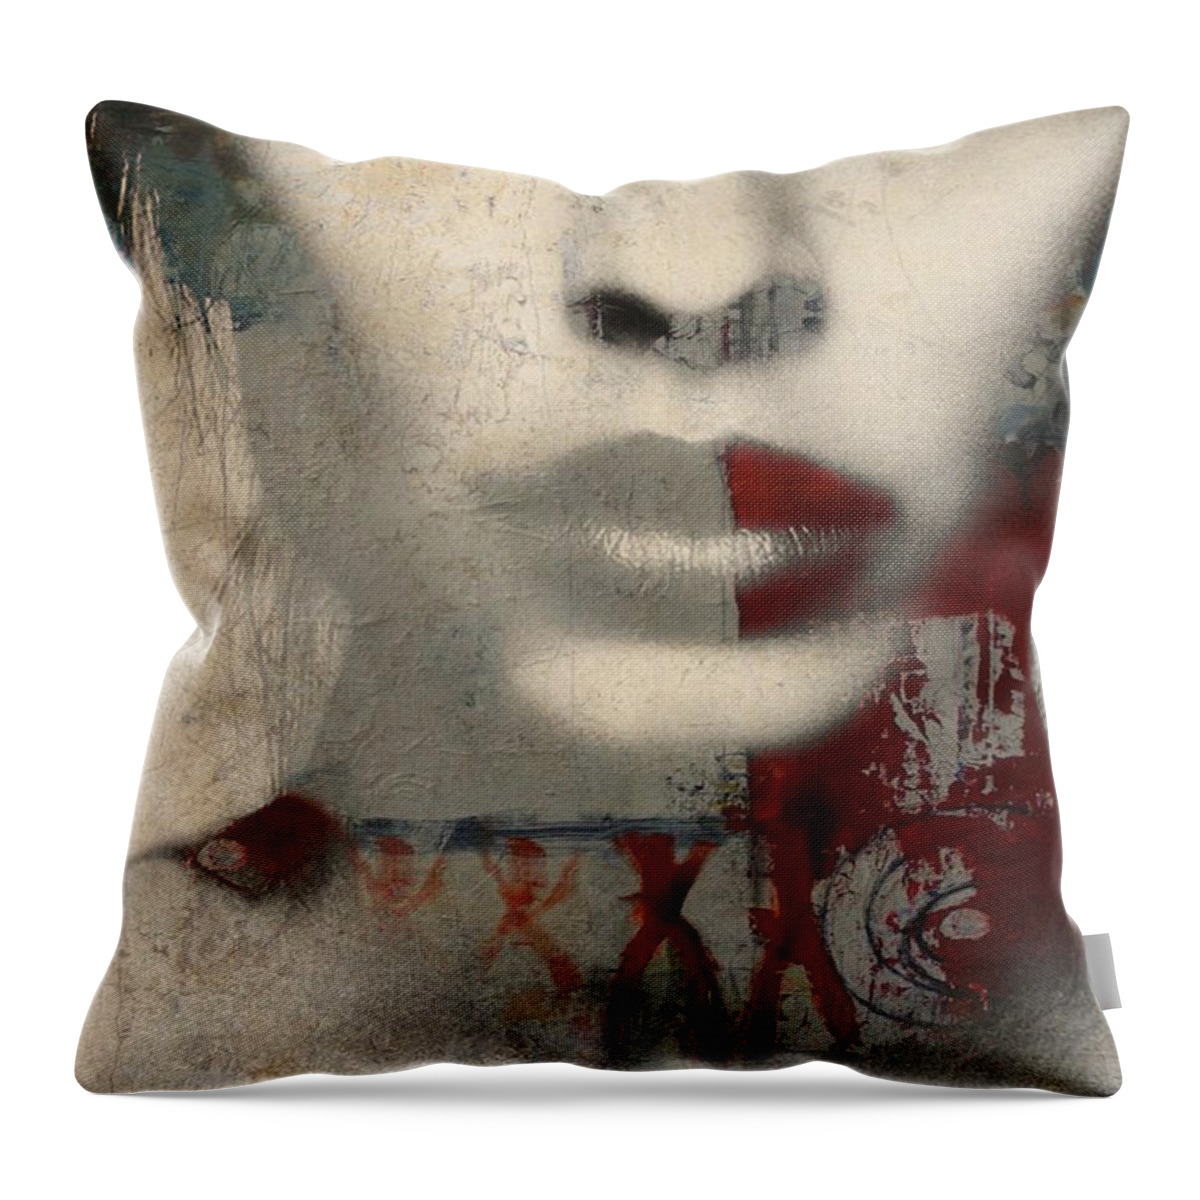 Woman Throw Pillow featuring the digital art Were All Alone by Paul Lovering